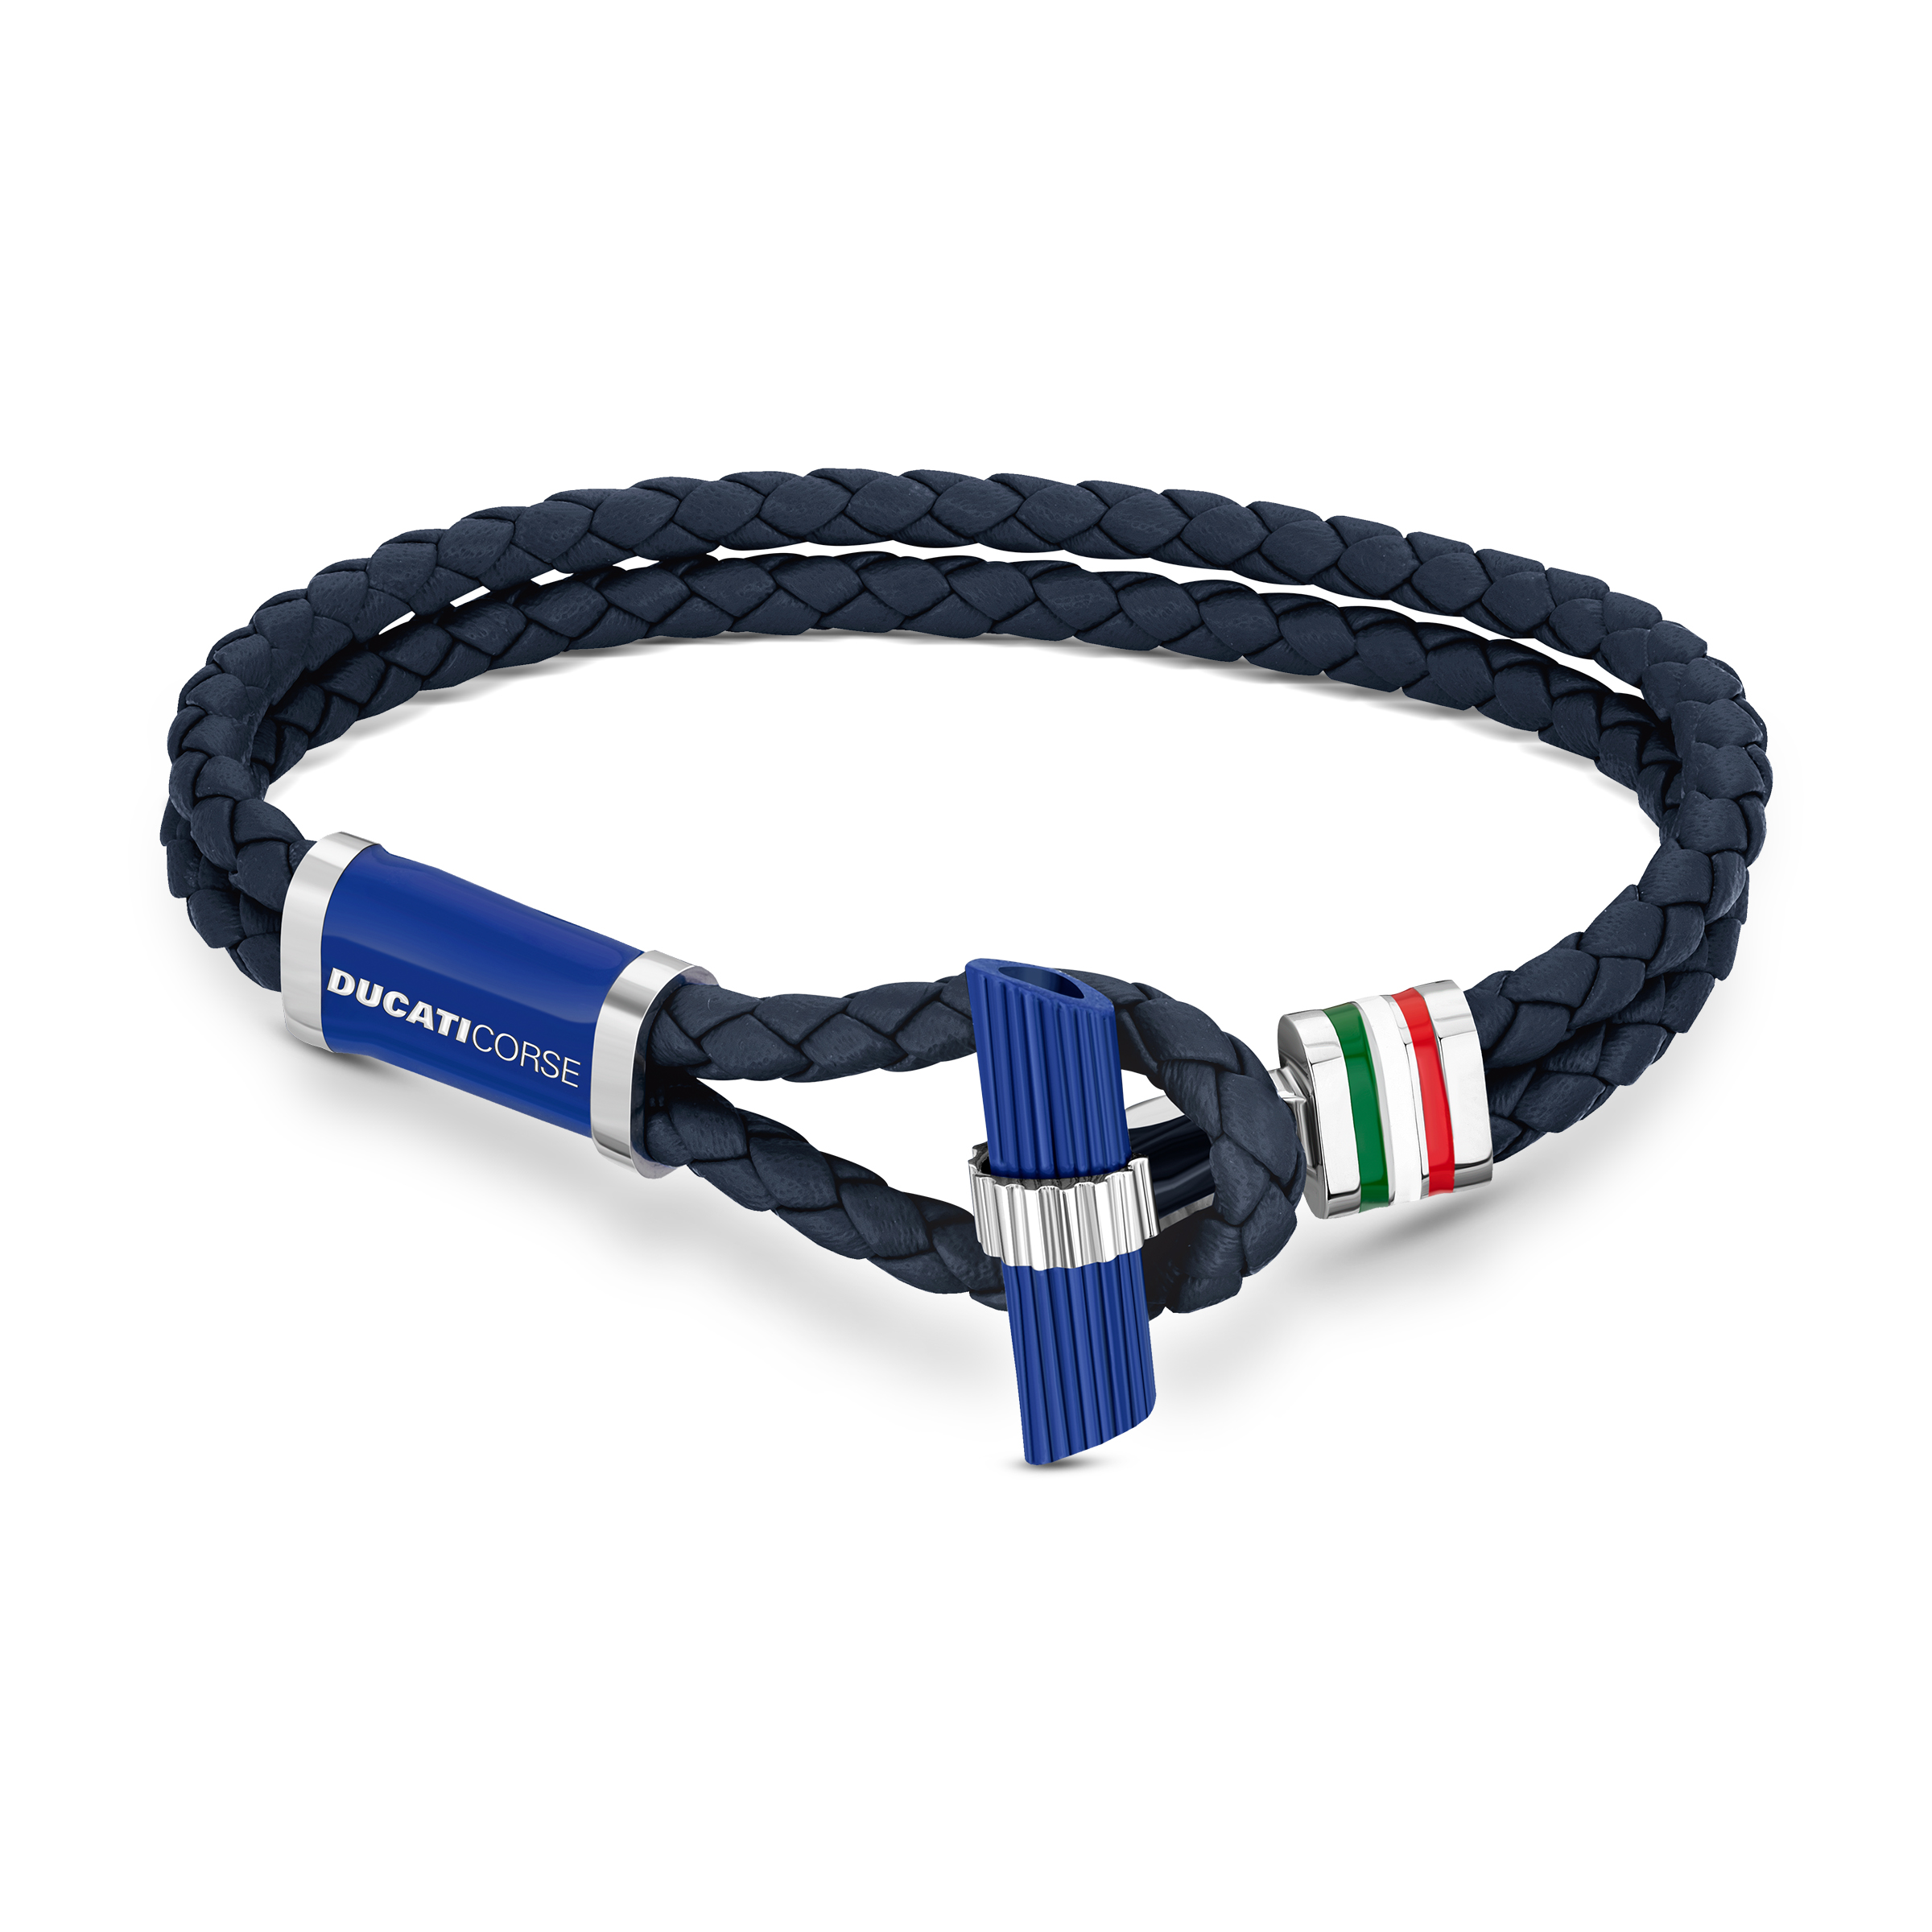 Ducati - DTAGB2136809 - COLLEZIONE T NAVY LEATHER WITH Stainless Steel BRACELET LARGE